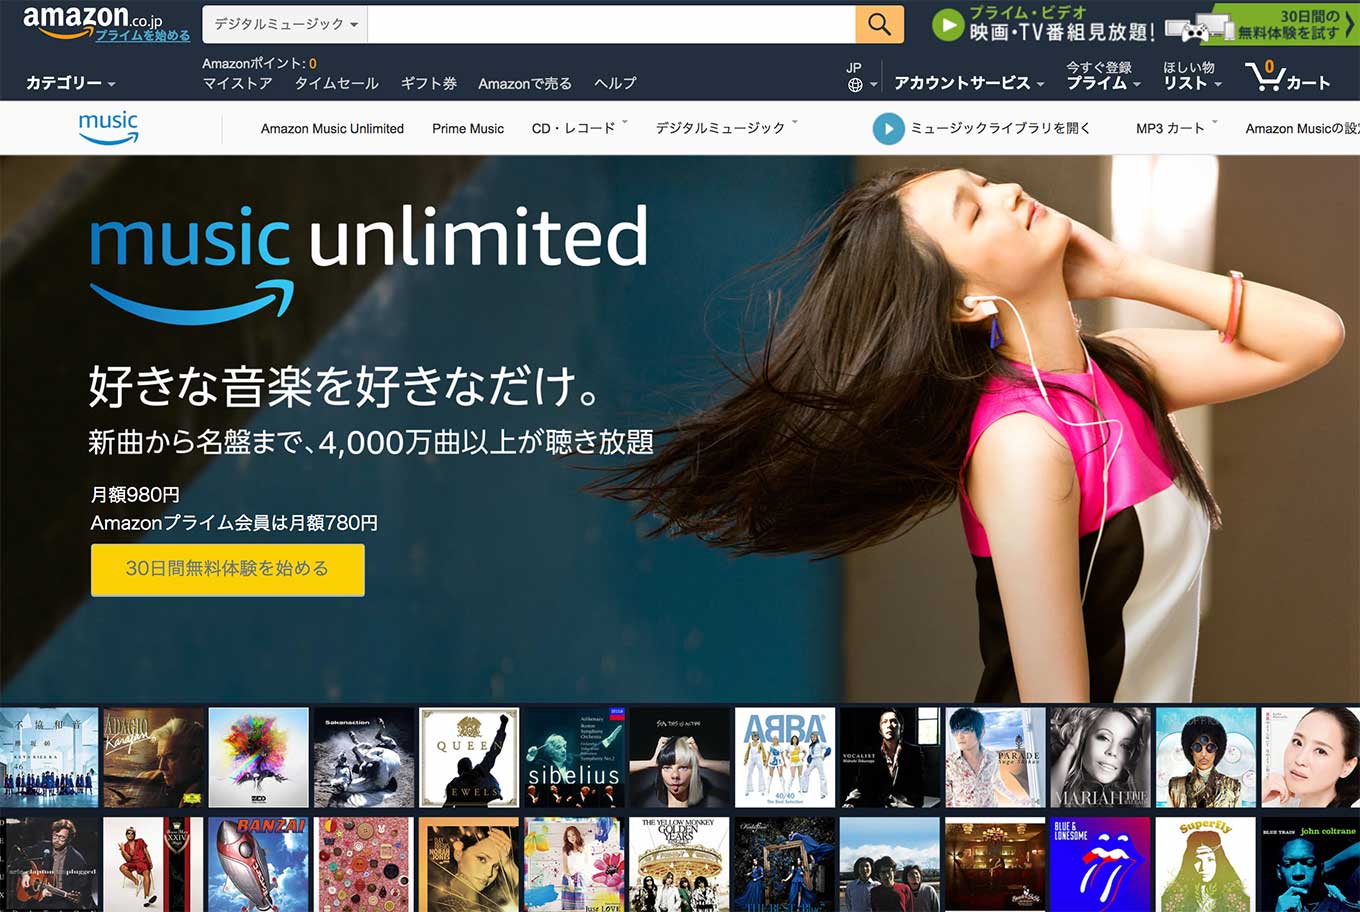 Musicunlimited